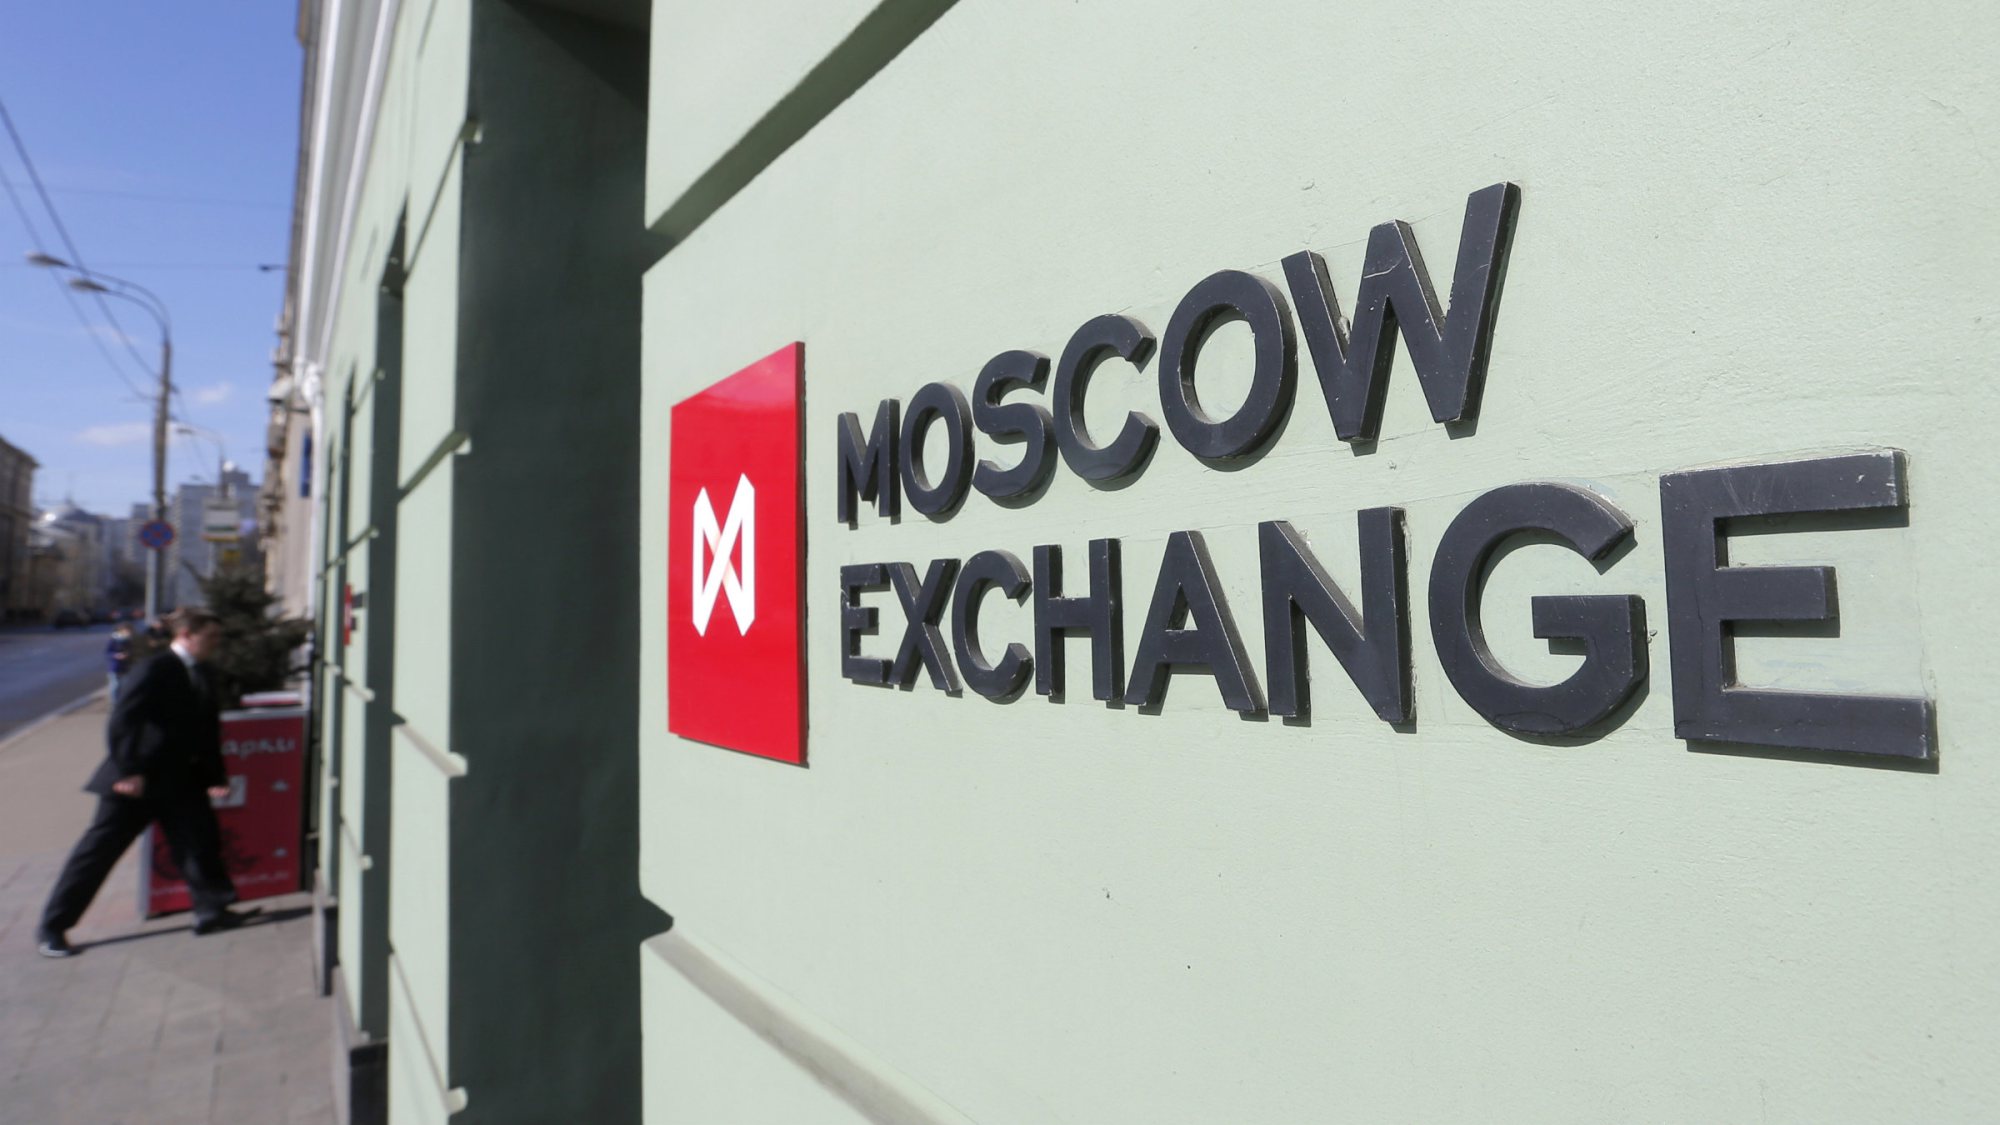 moscow-exchange.jpg